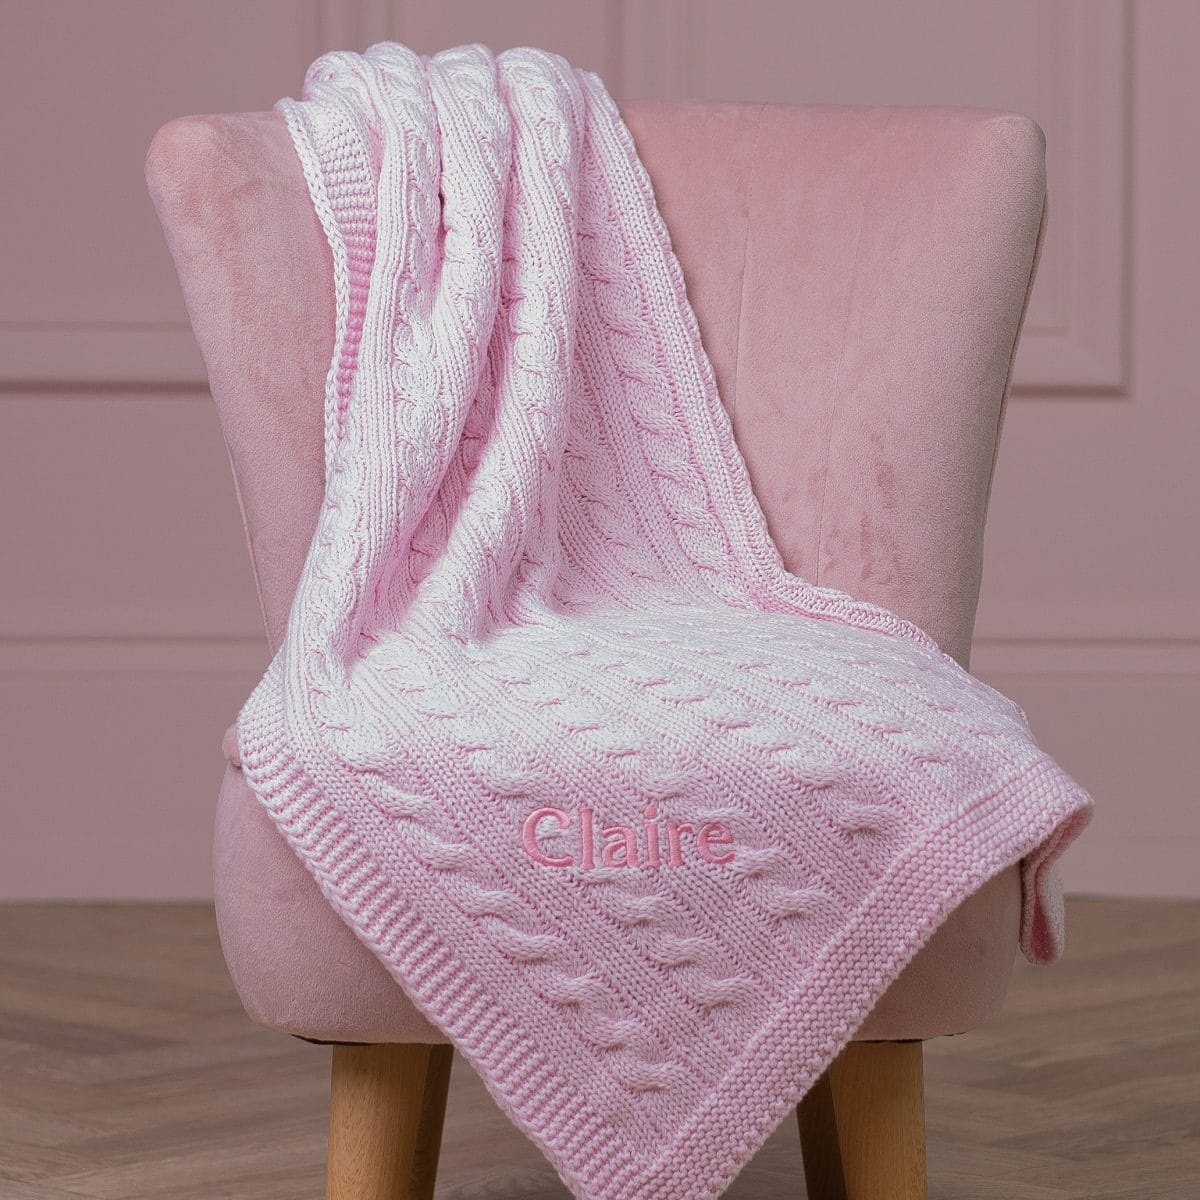 Toffee Moon personalised pale pink luxury cable baby blanket Birthday Gifts 2